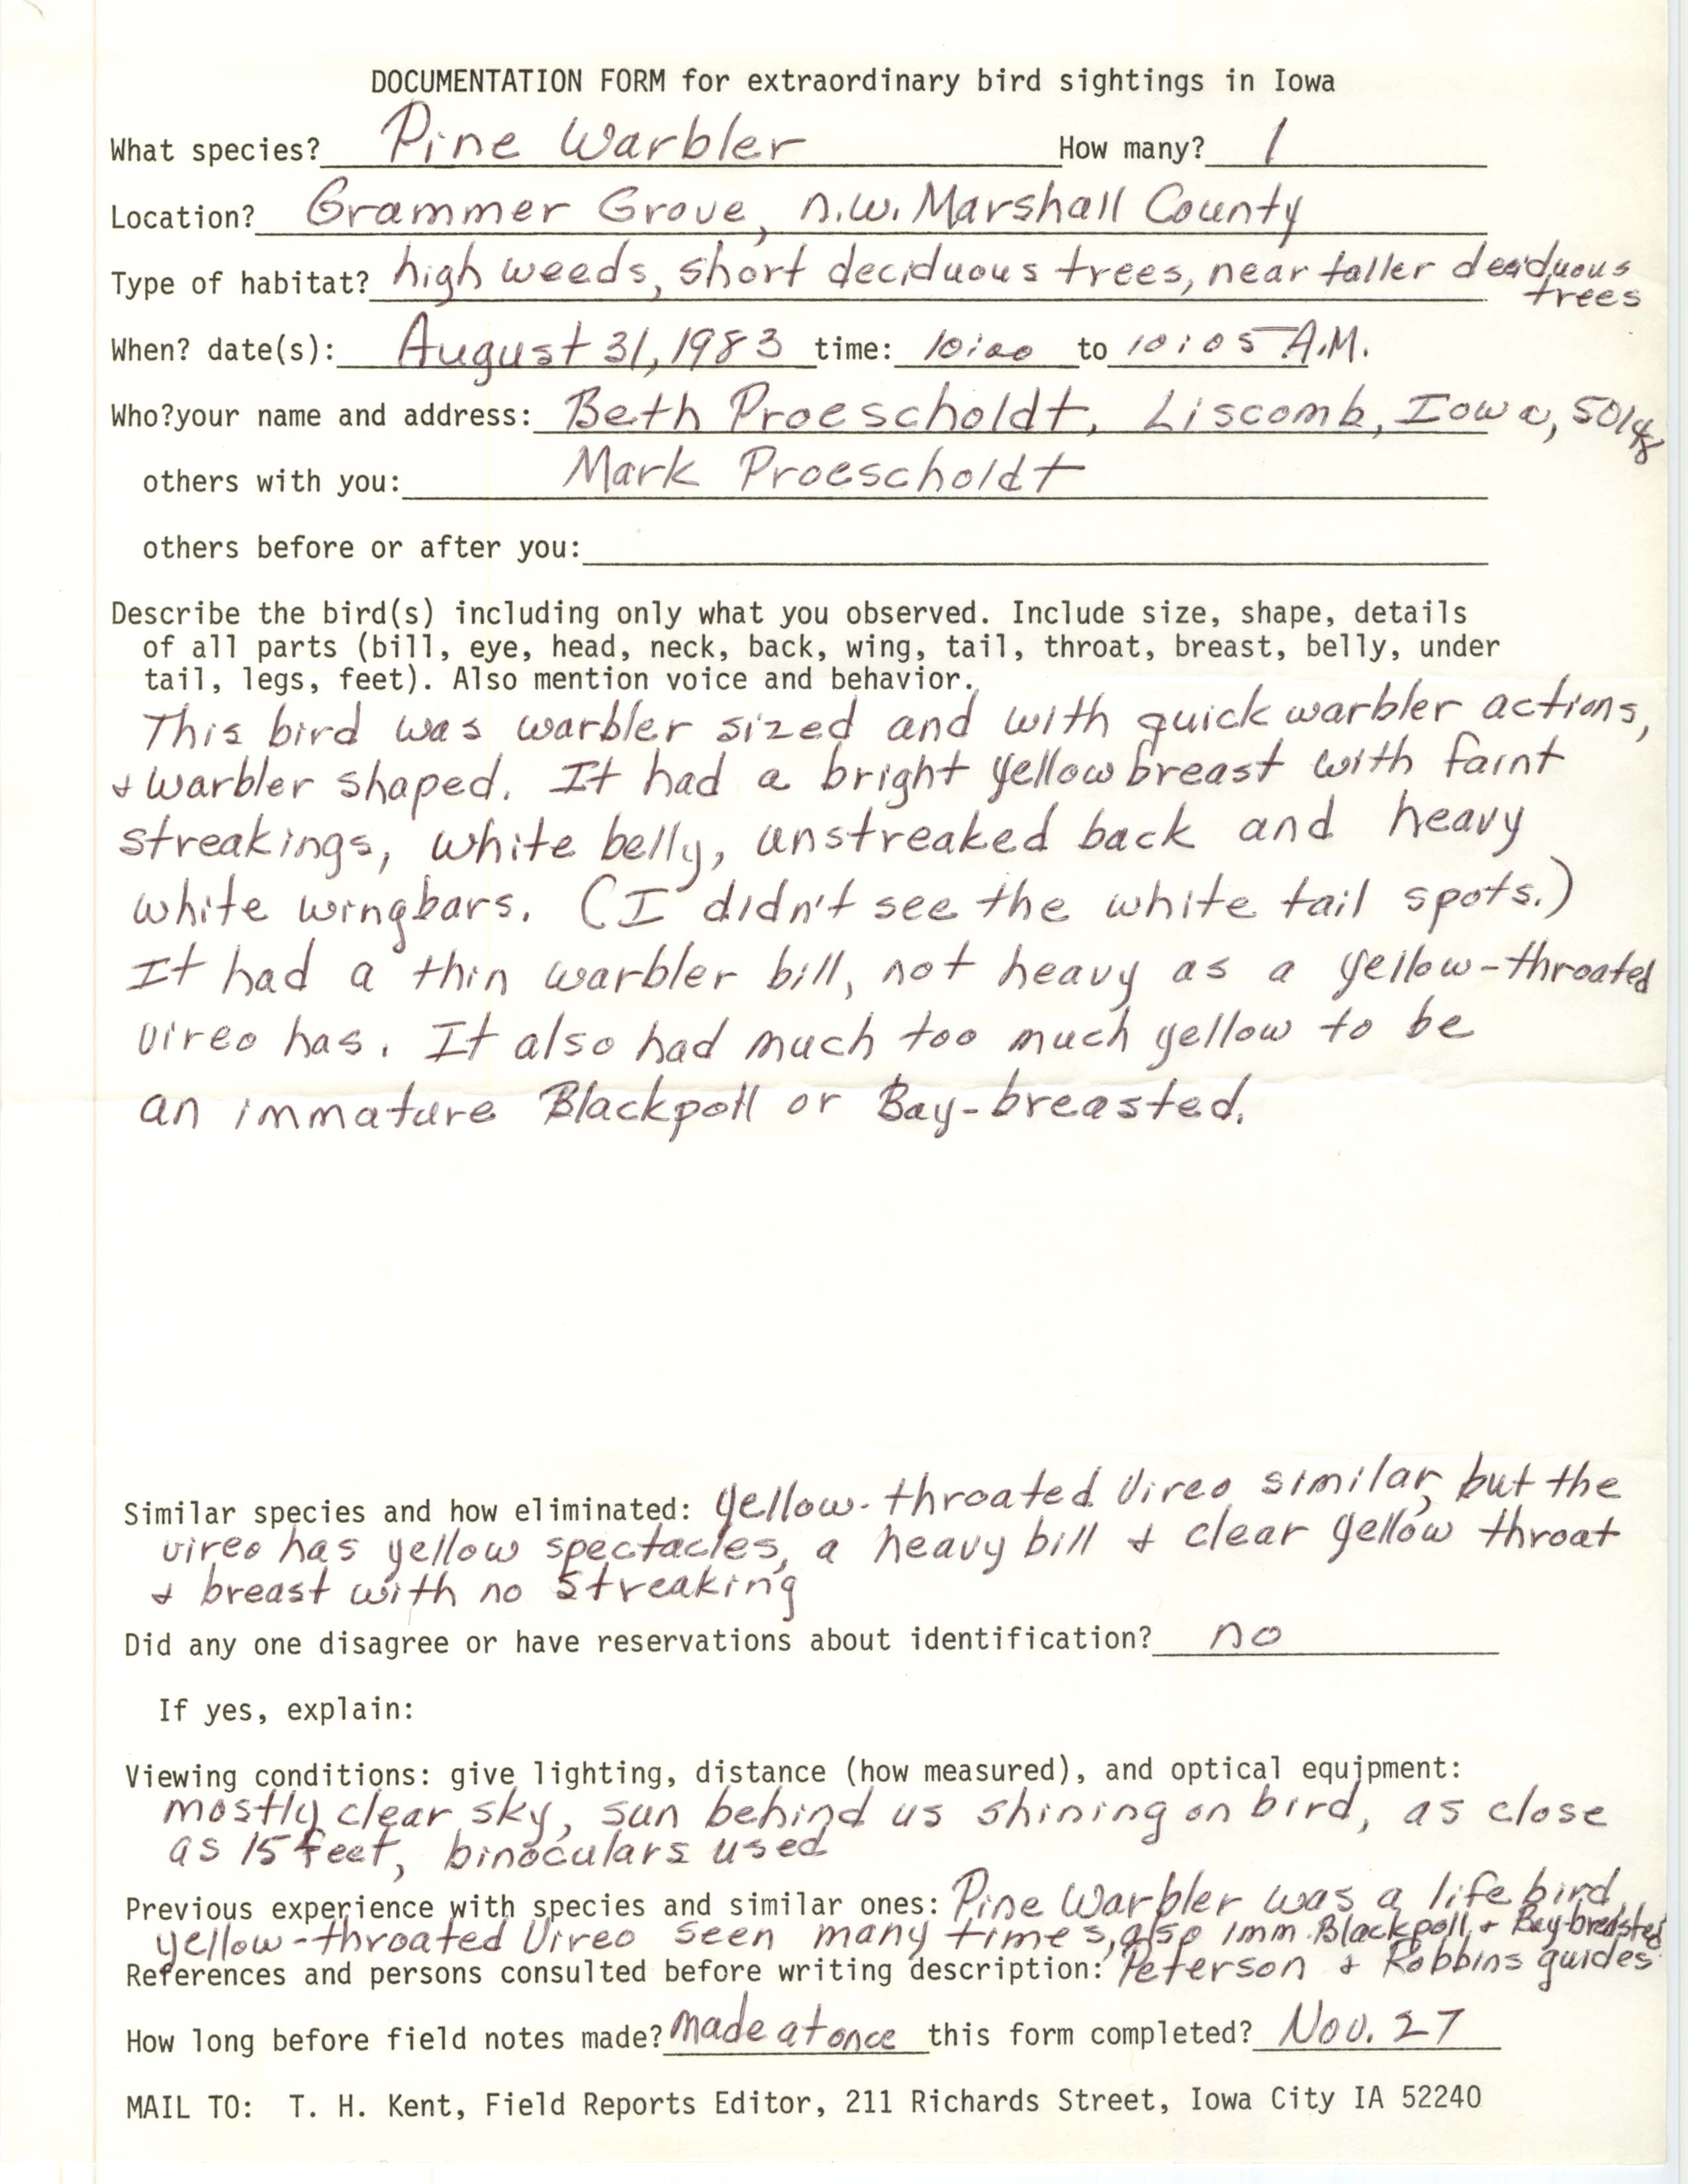 Rare bird documentation form for Pine Warbler at Grammer Grove County Wildlife Area, 1983